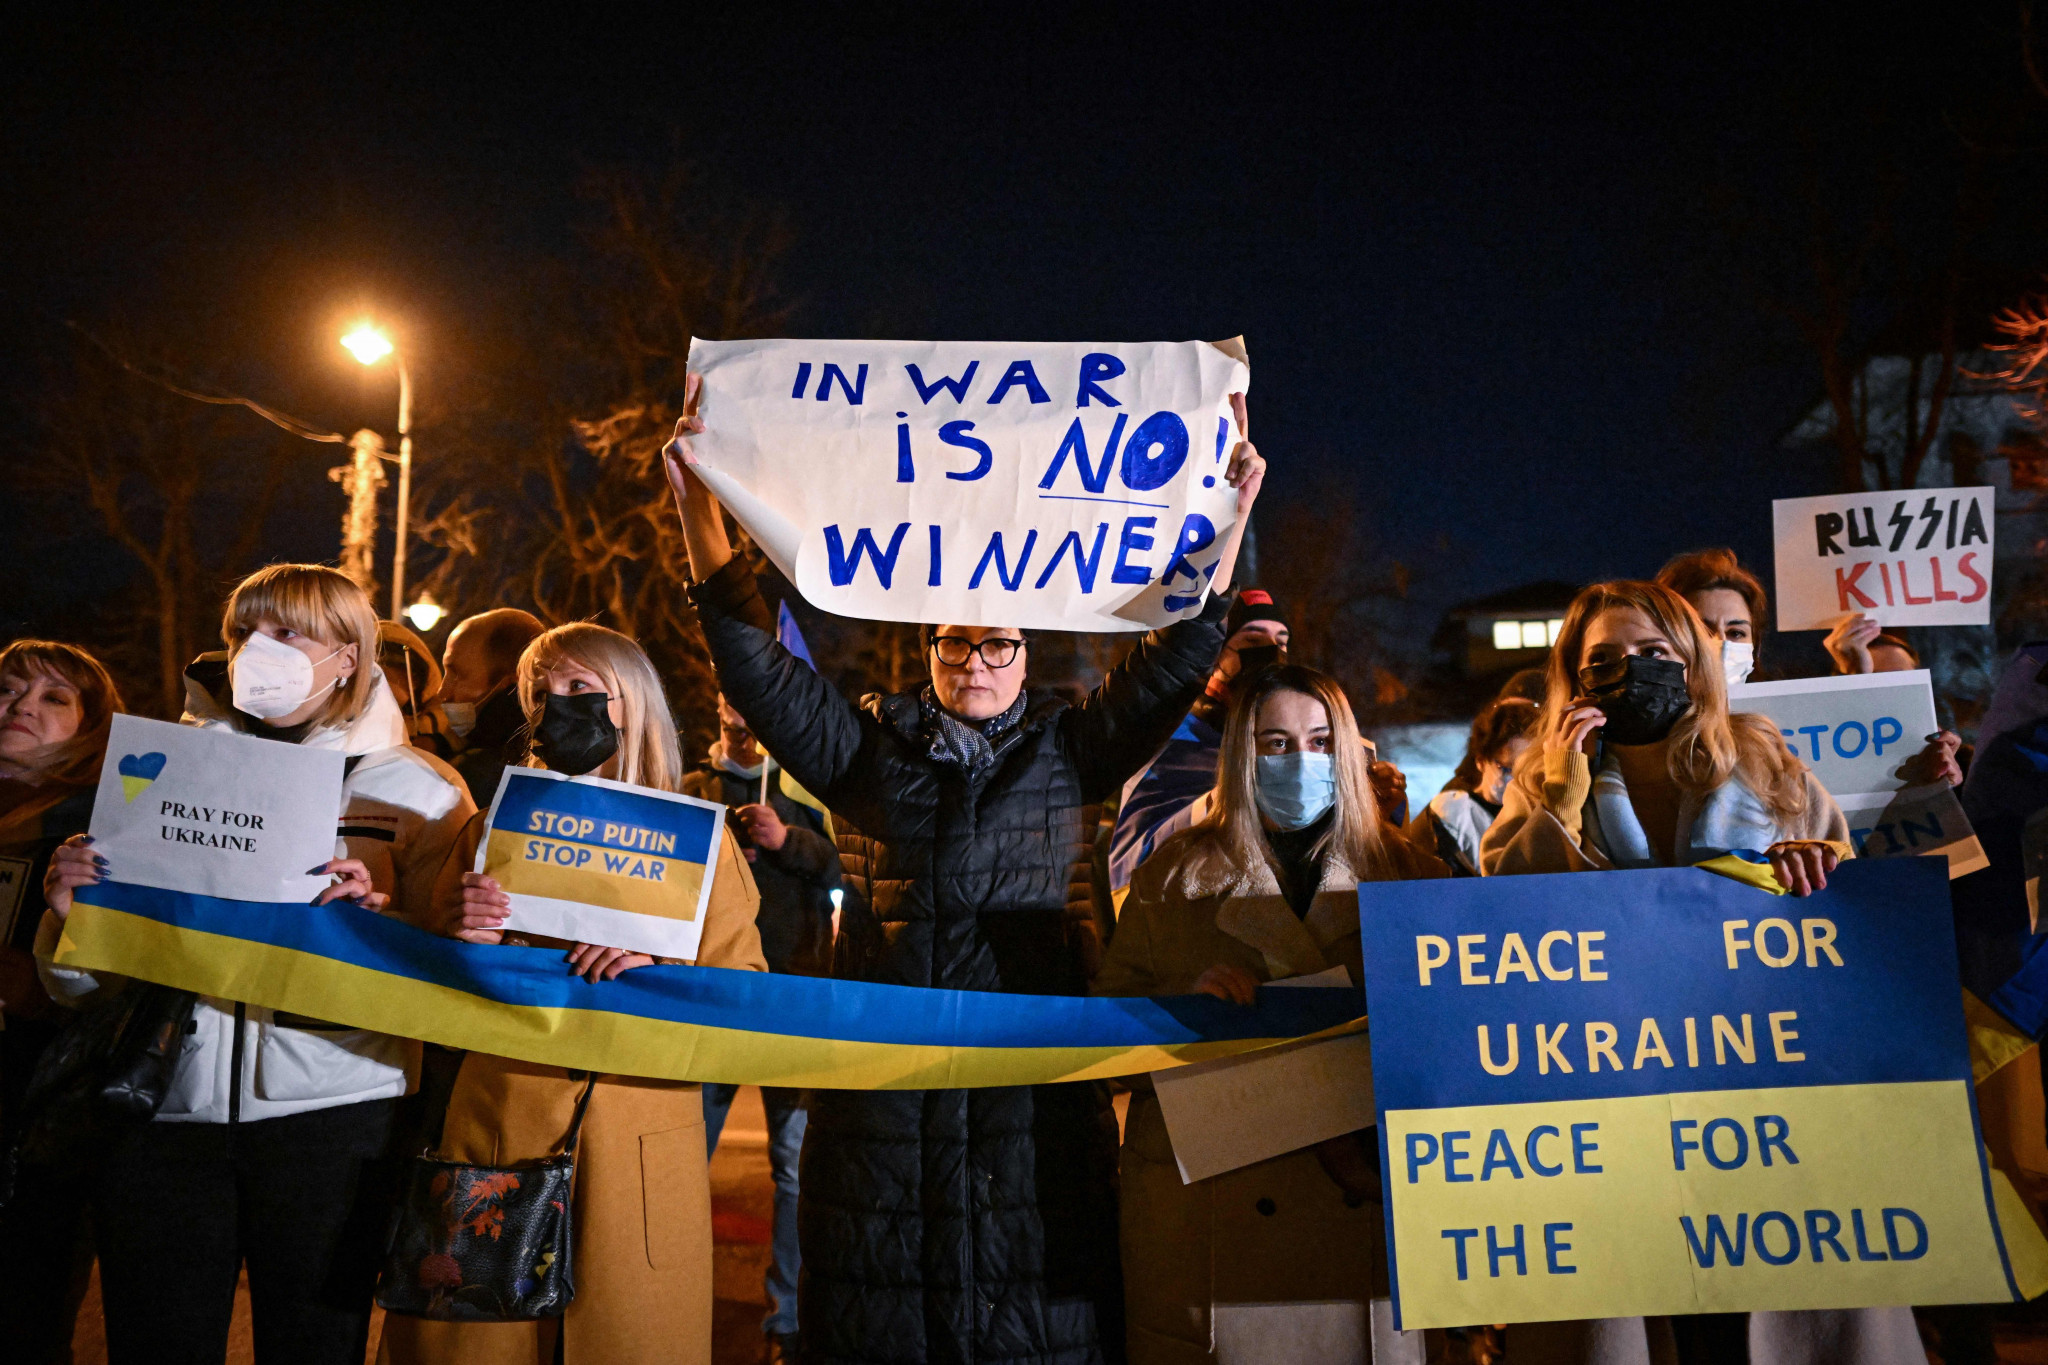 Russia's invasion of Ukraine has been met with protests in the West, and economic sanctions ©Getty Images